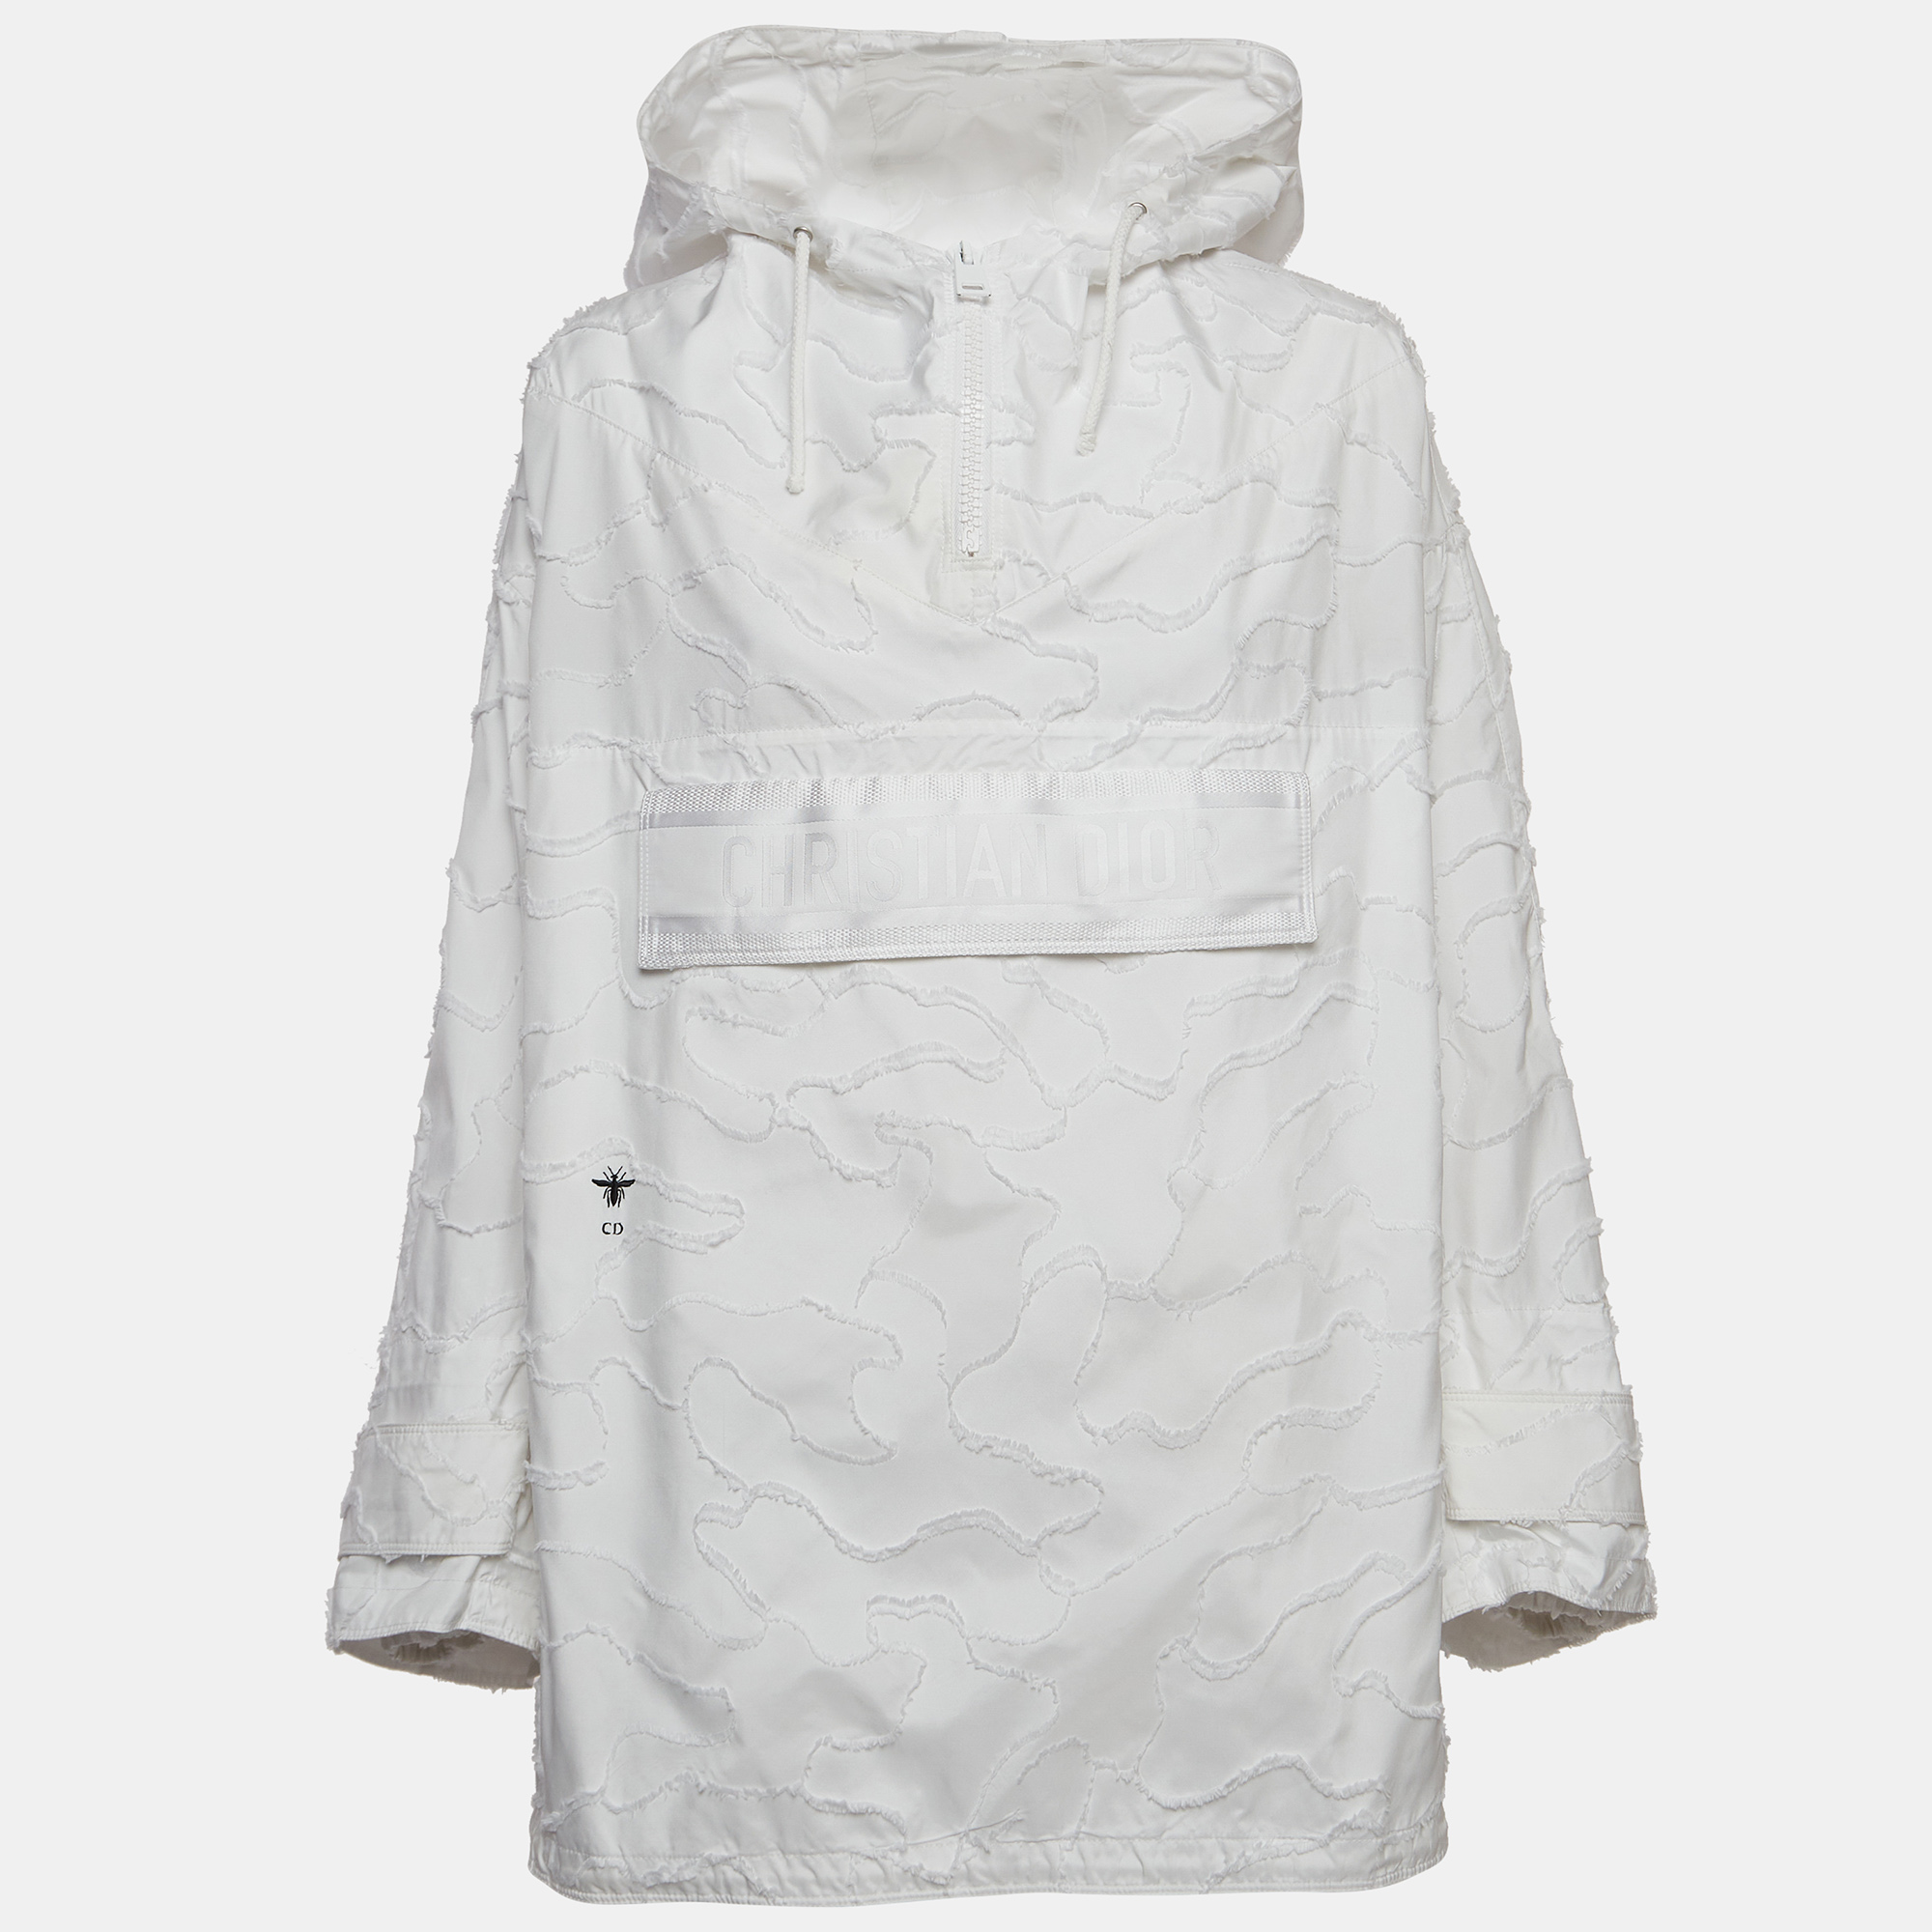 Dior white synthetic technical taffeta hooded anorak jacket s